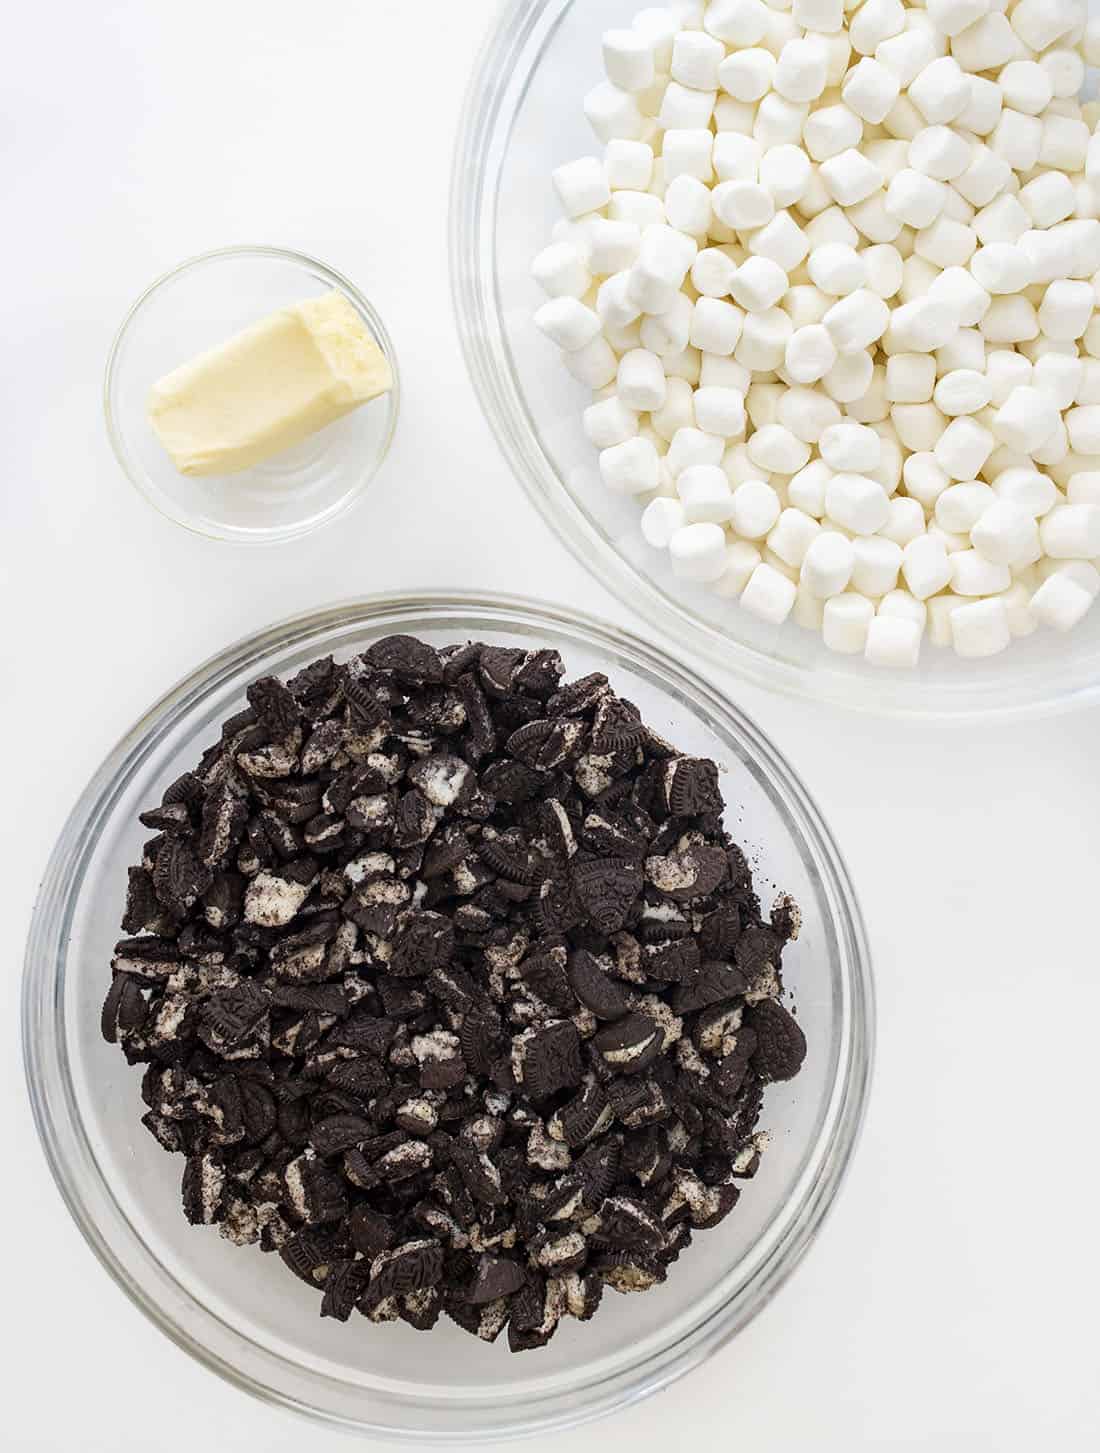 Ingredients for Oreo Bars